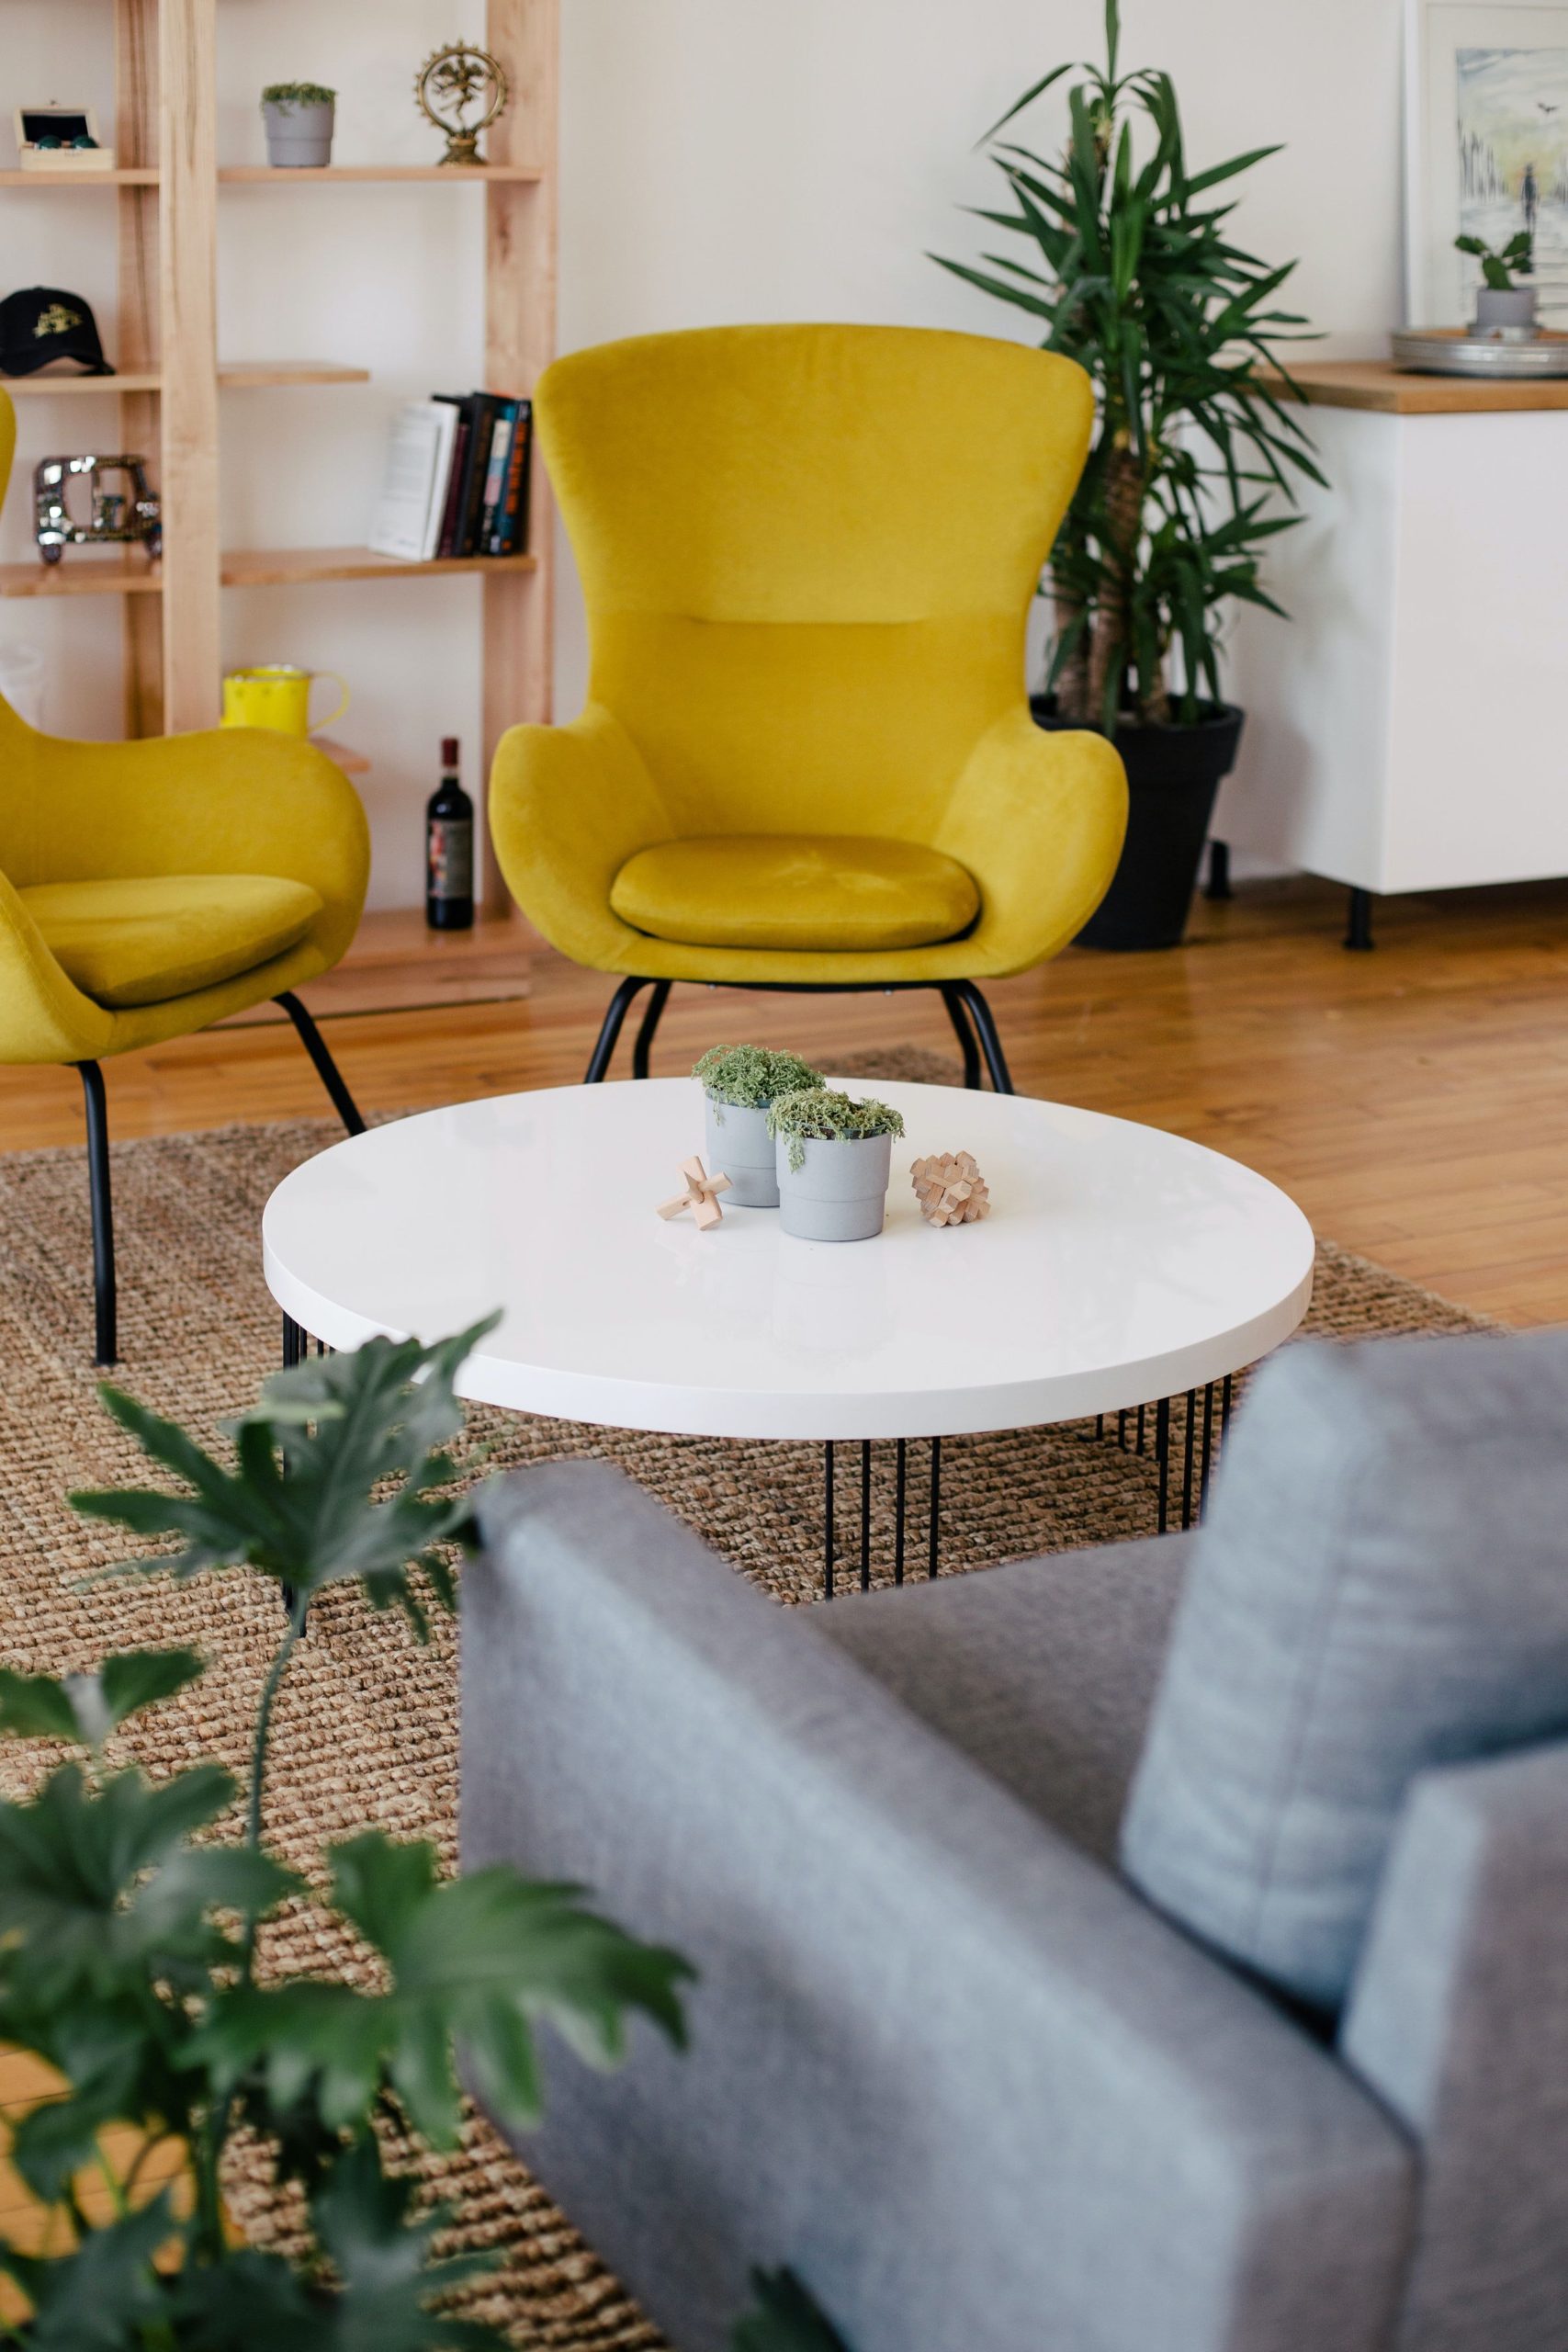 Image of a room with two yellow chairs and a gray couch. This is an example of a space where you could work with a burnout therapist for burnout treatment in Los Angeles, CA. 90504 | 90505